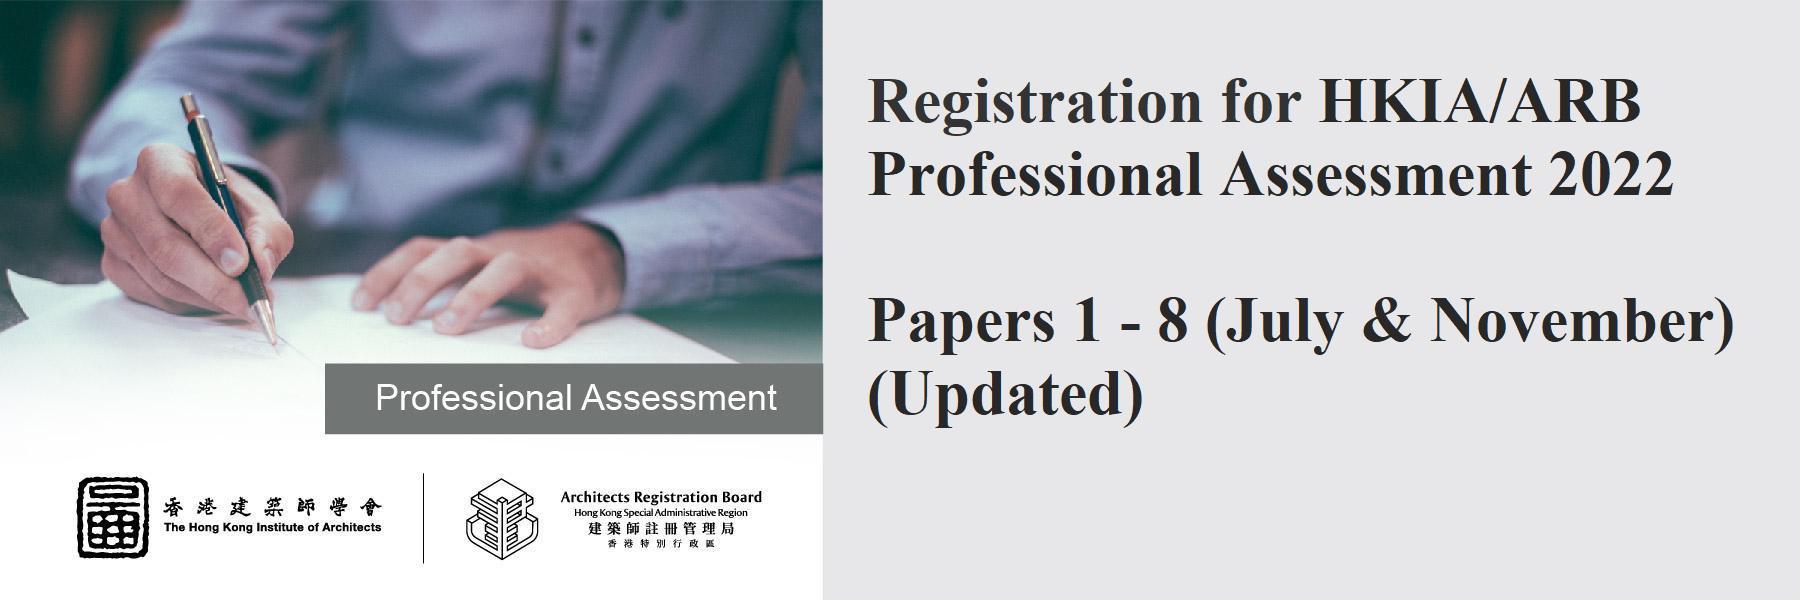 Registration for HKIA/ARB Professional Assessment 2022 – Papers 1 - 8 (July & November)(Updated)